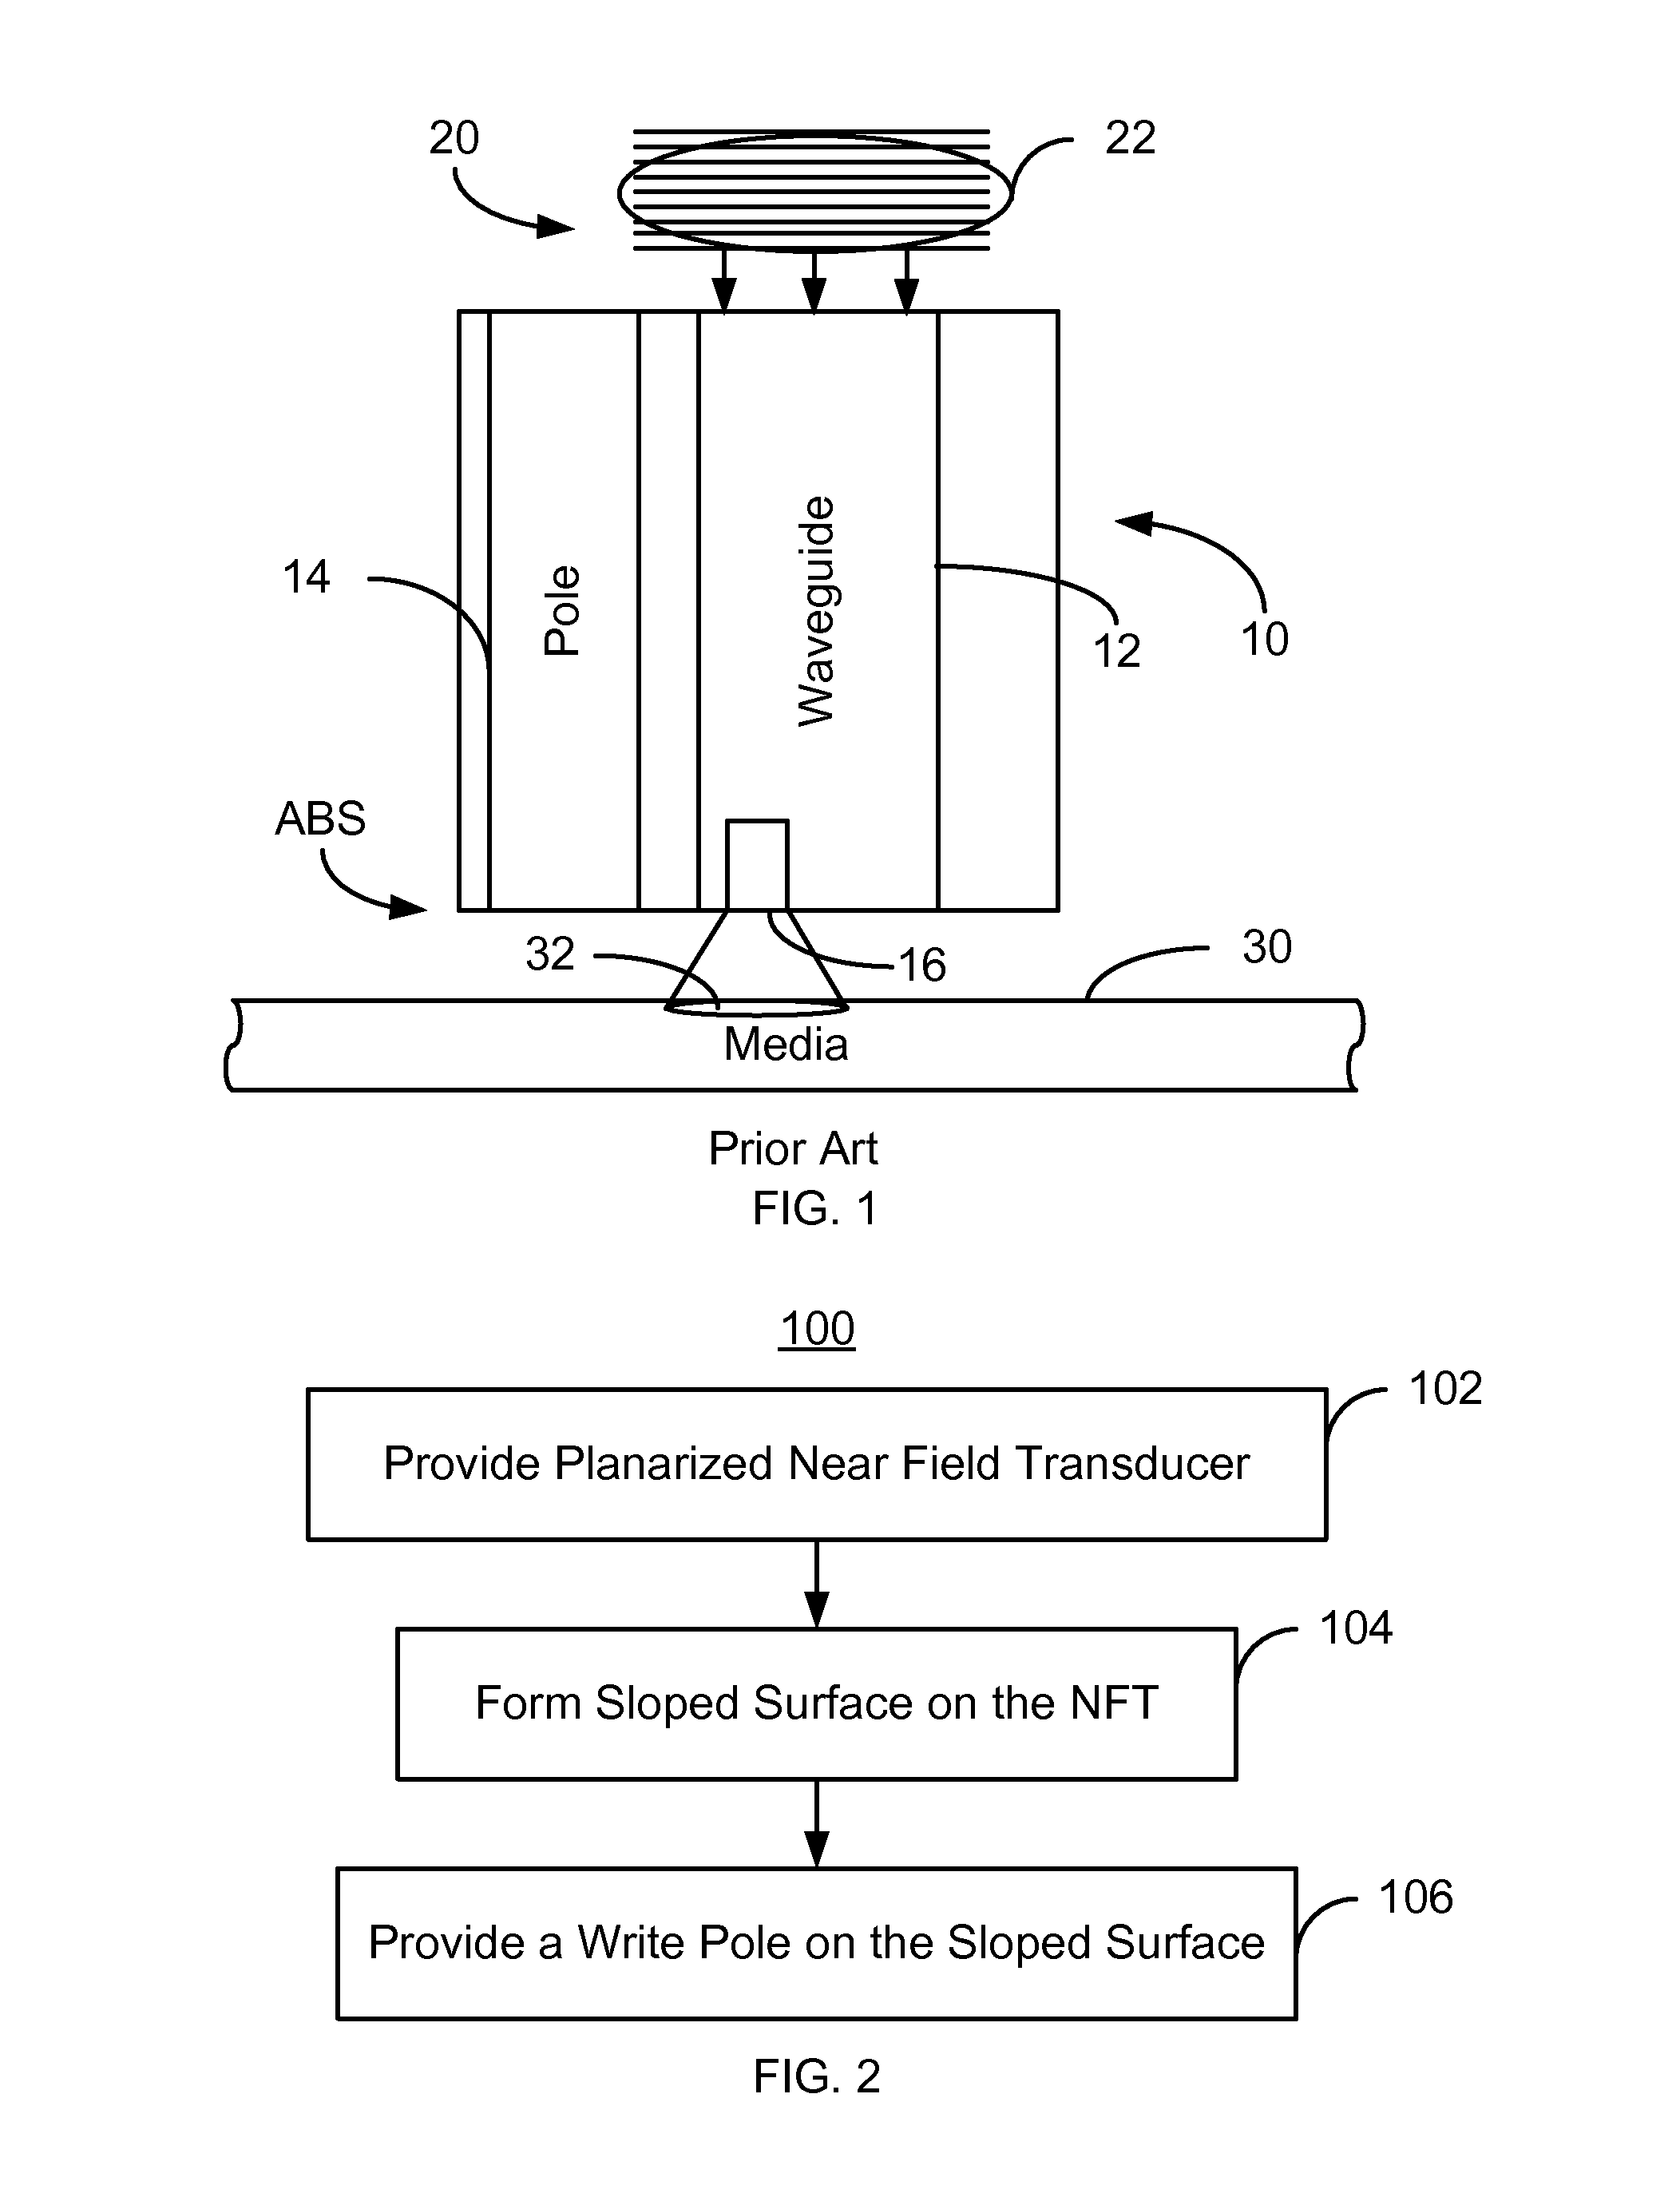 Method and system for providing a magnetic recording transducer having a planarized near-field transducer and a sloped pole